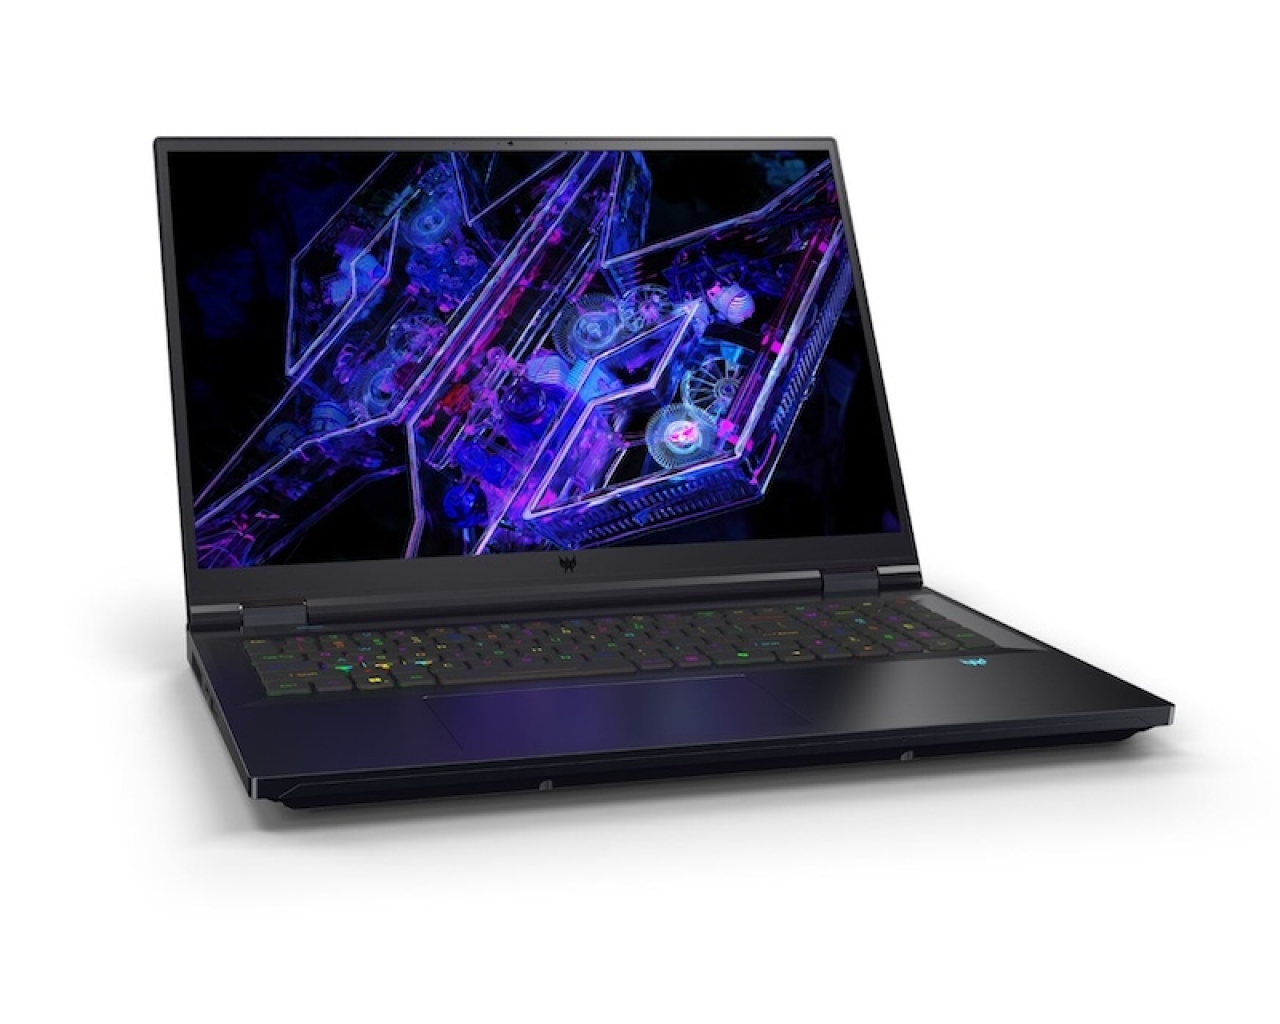 Acer announces three new Aspire 5 laptops with 11th Gen Intel Core